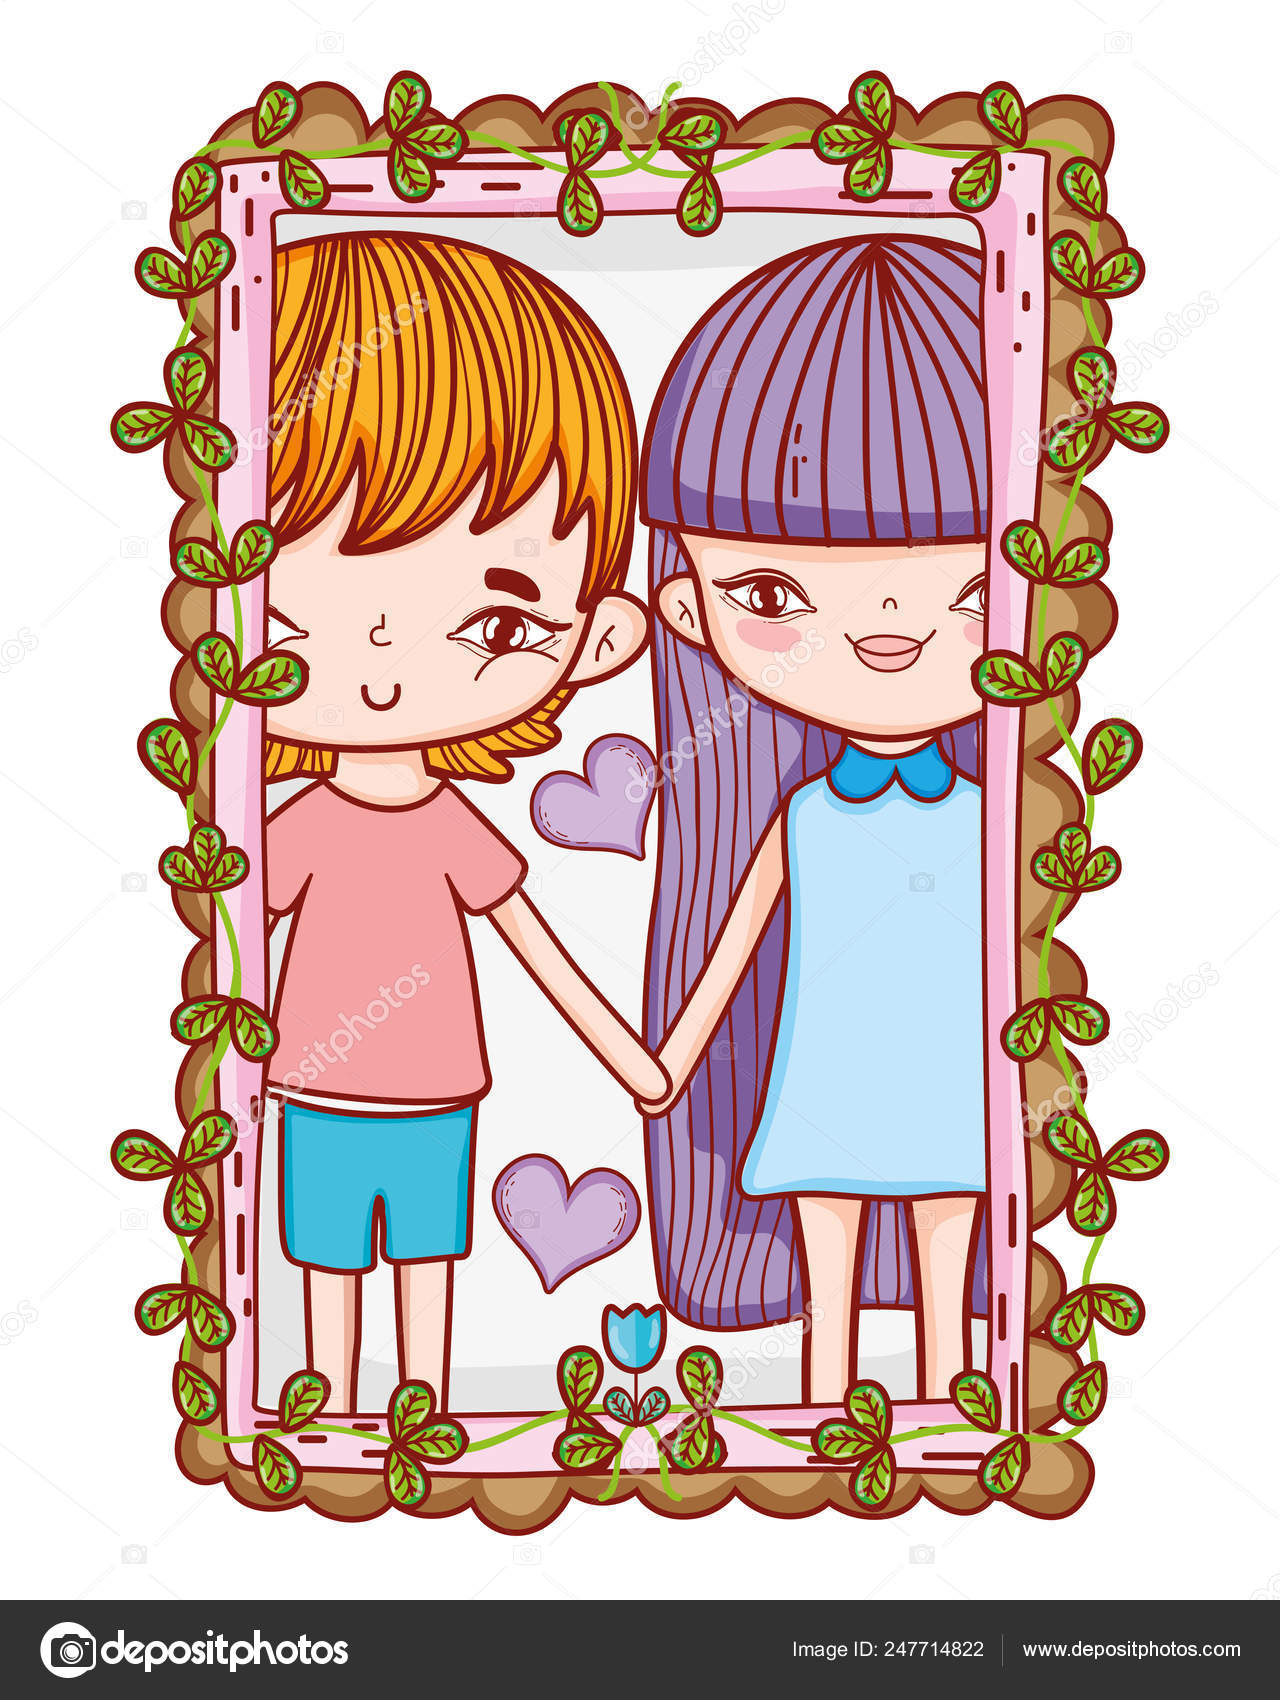 Cute Boy And Girl Cartoons Vector Image By C Stockgiu Vector Stock